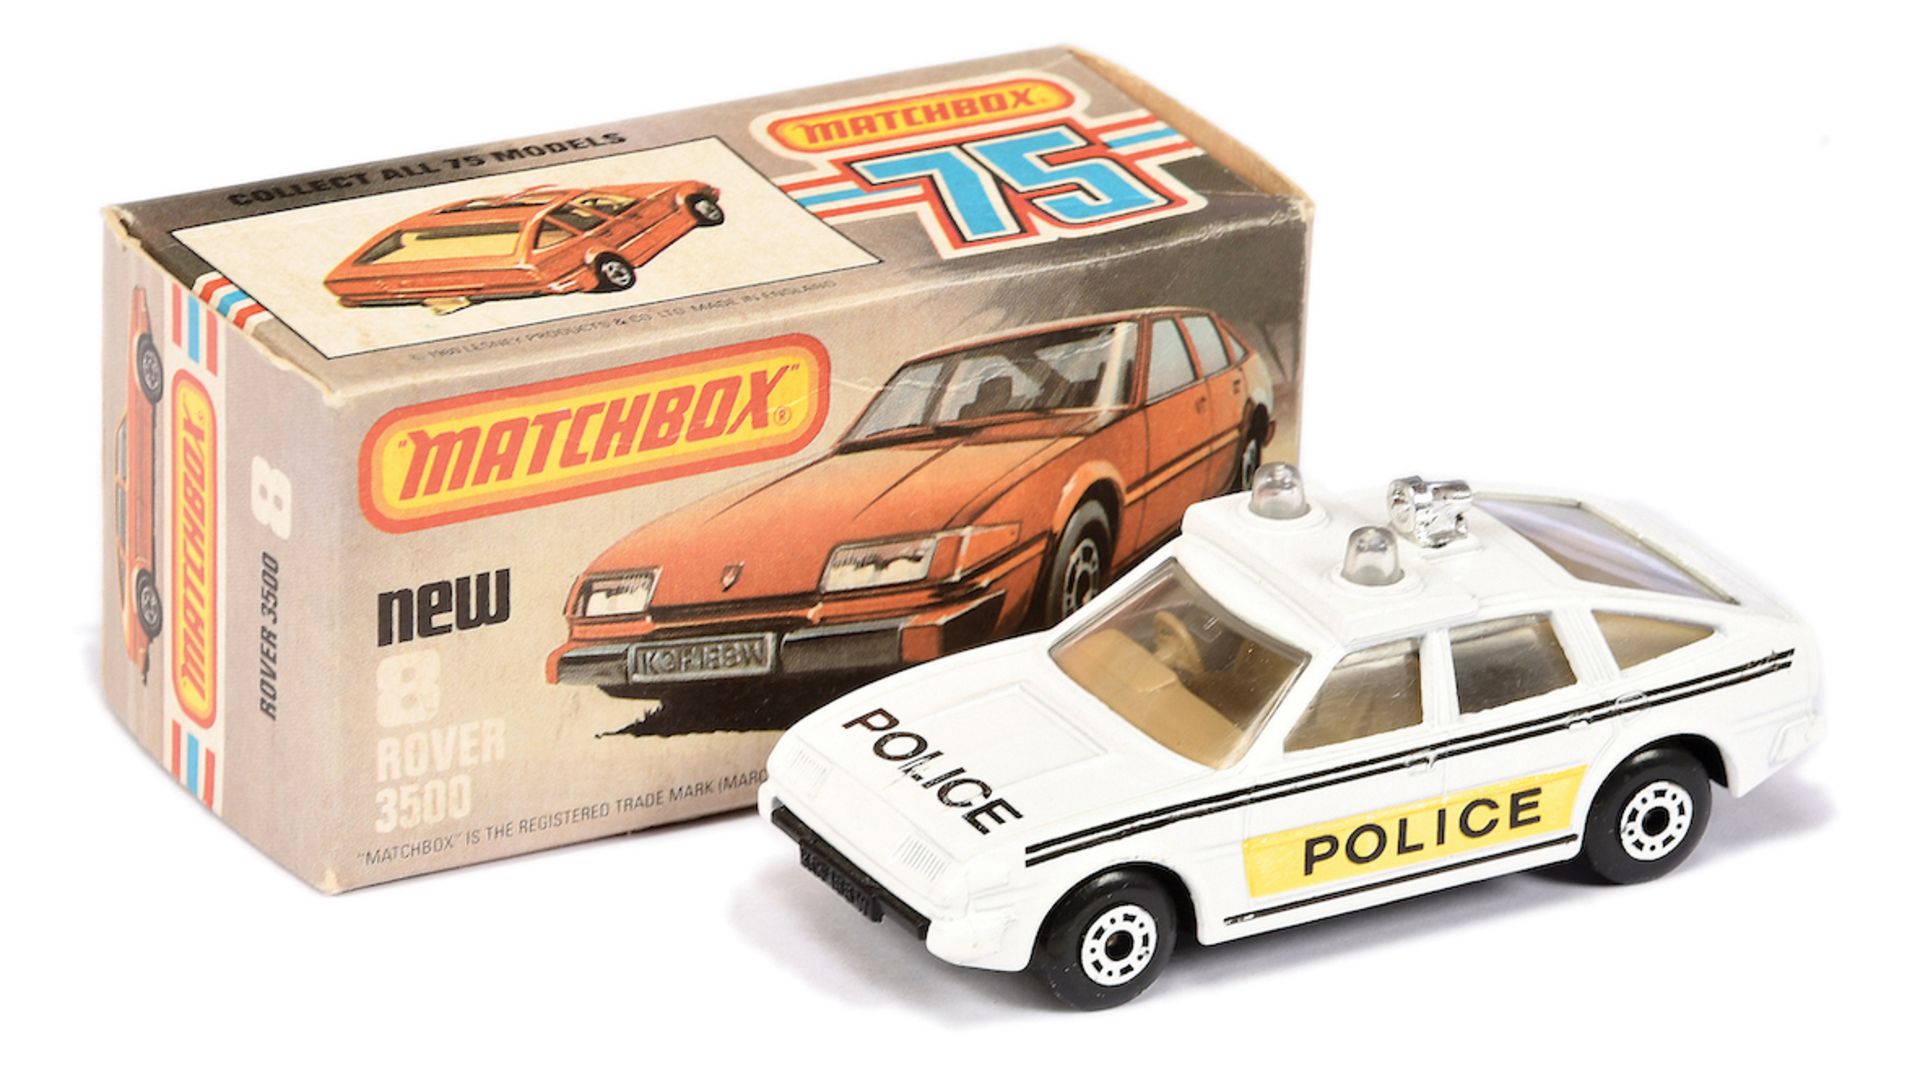 Matchbox cars sell for £300,000